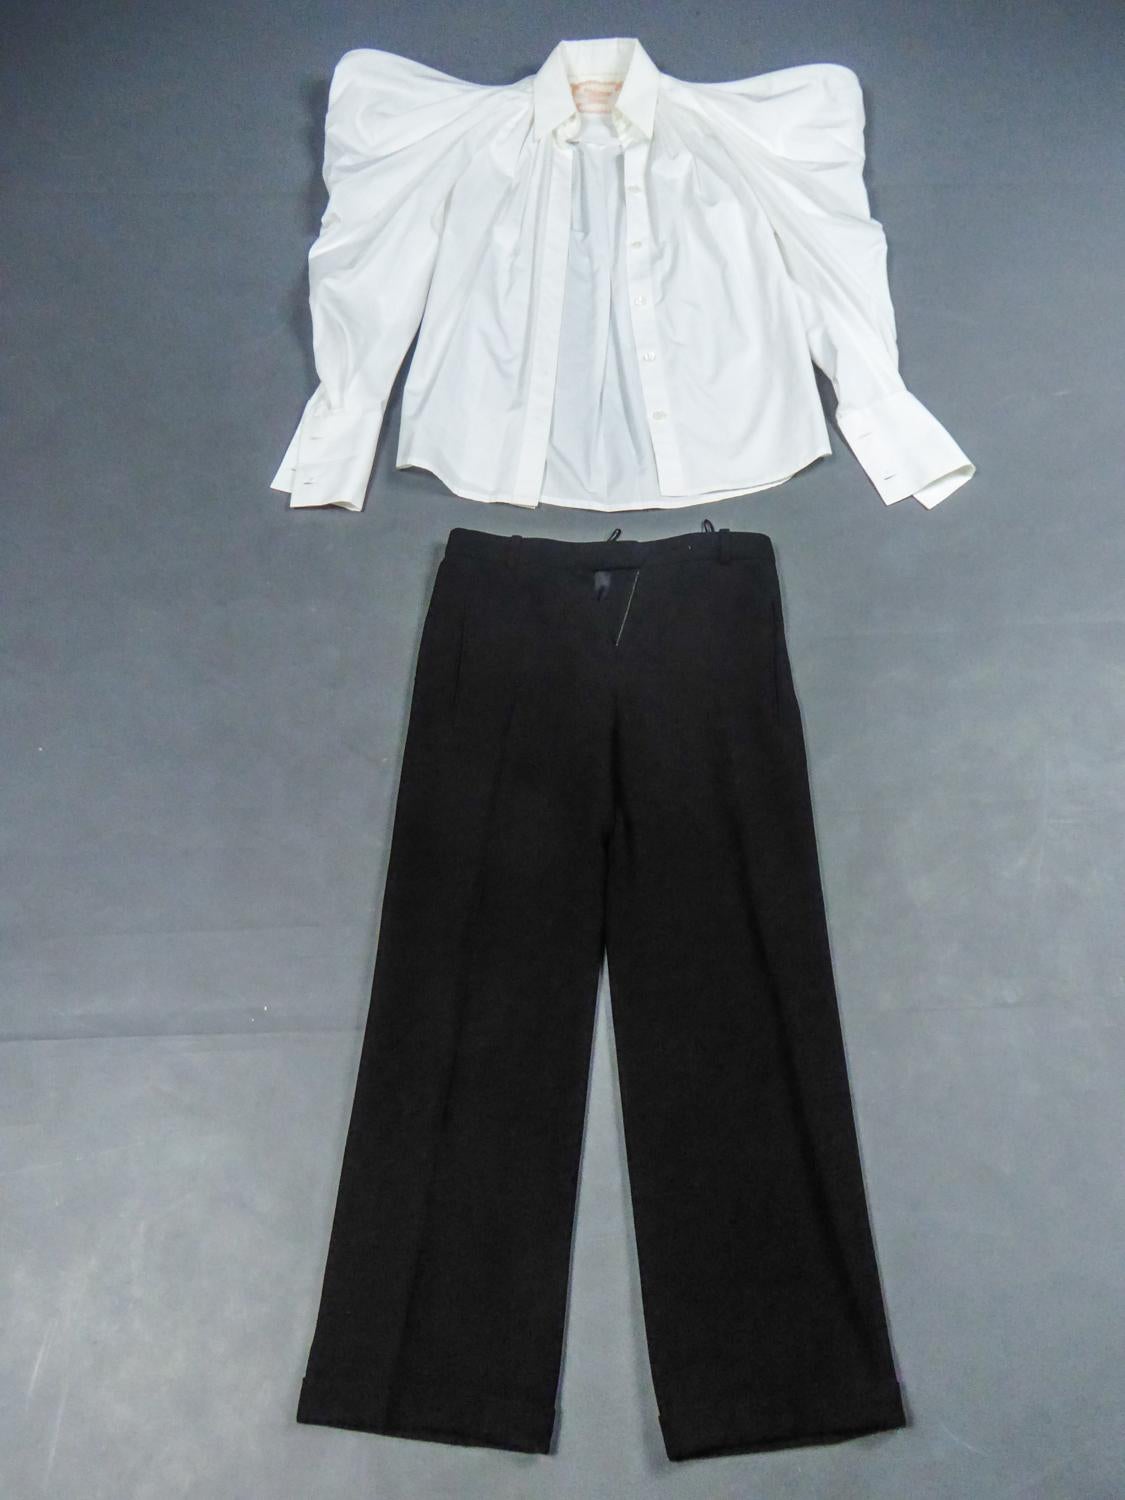 Spring Summer Collection 2014
France

Haute Couture set consisting of a blouse in white cotton poplin with puffed sleeves and a trousers in black crepe from the Spring Summer collection 2014 passage n ° 9 Jean Paul Gaultier. Blouse with dramatic